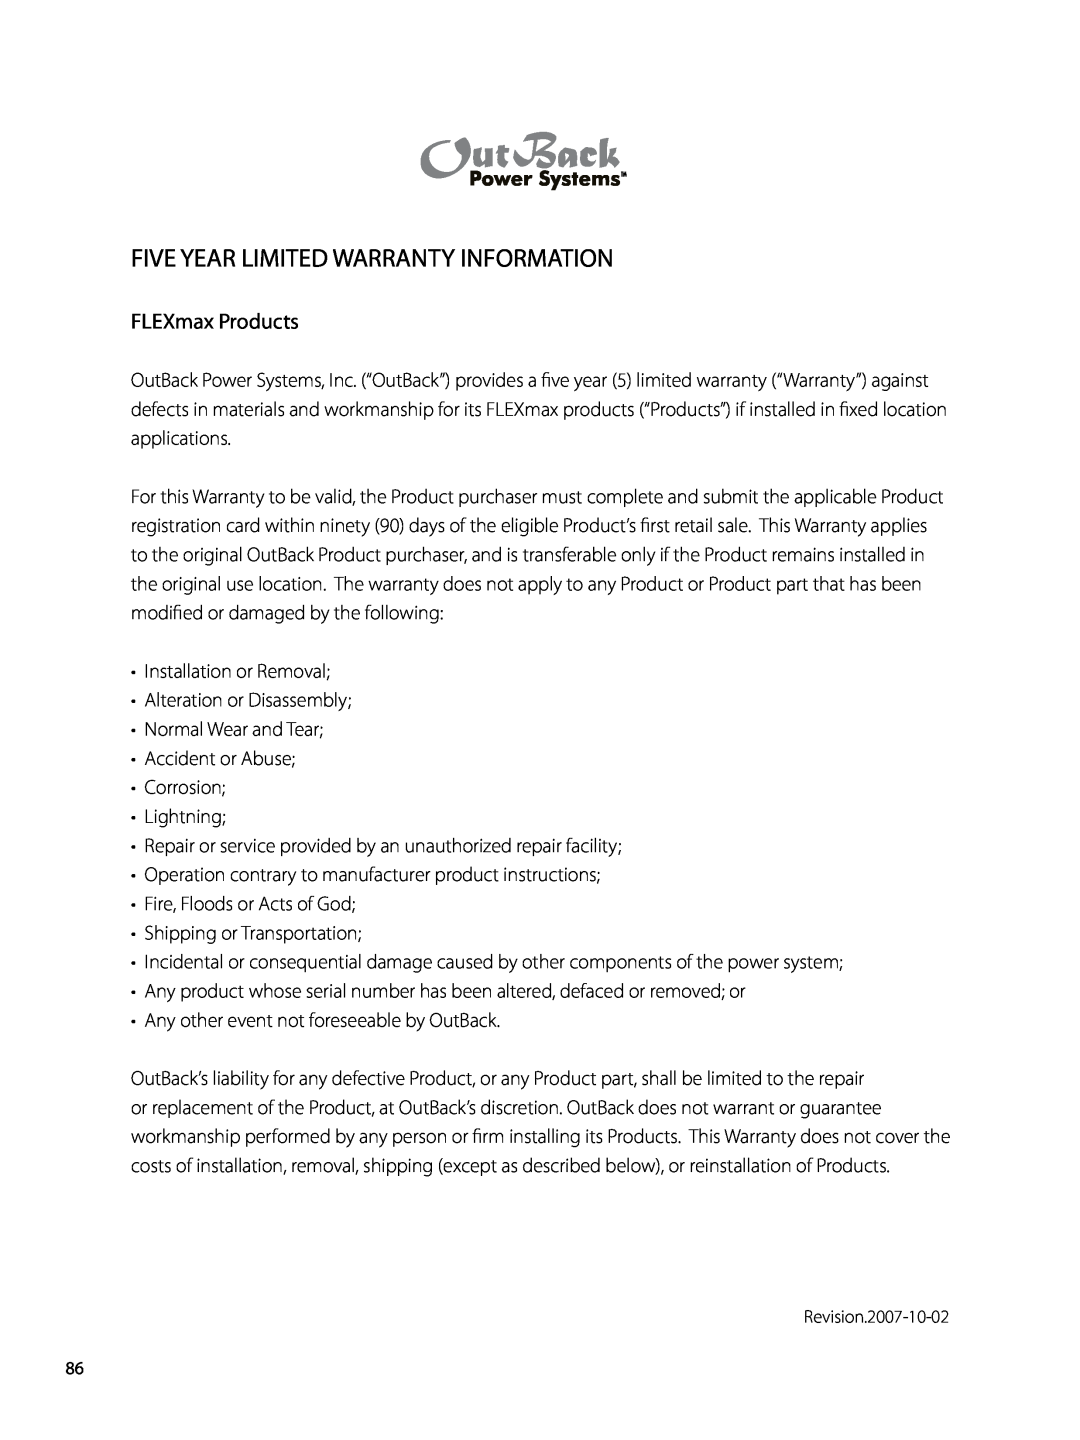 Outback Power Systems 80 user manual Five Year Limited Warranty Information, FLEXmax Products 